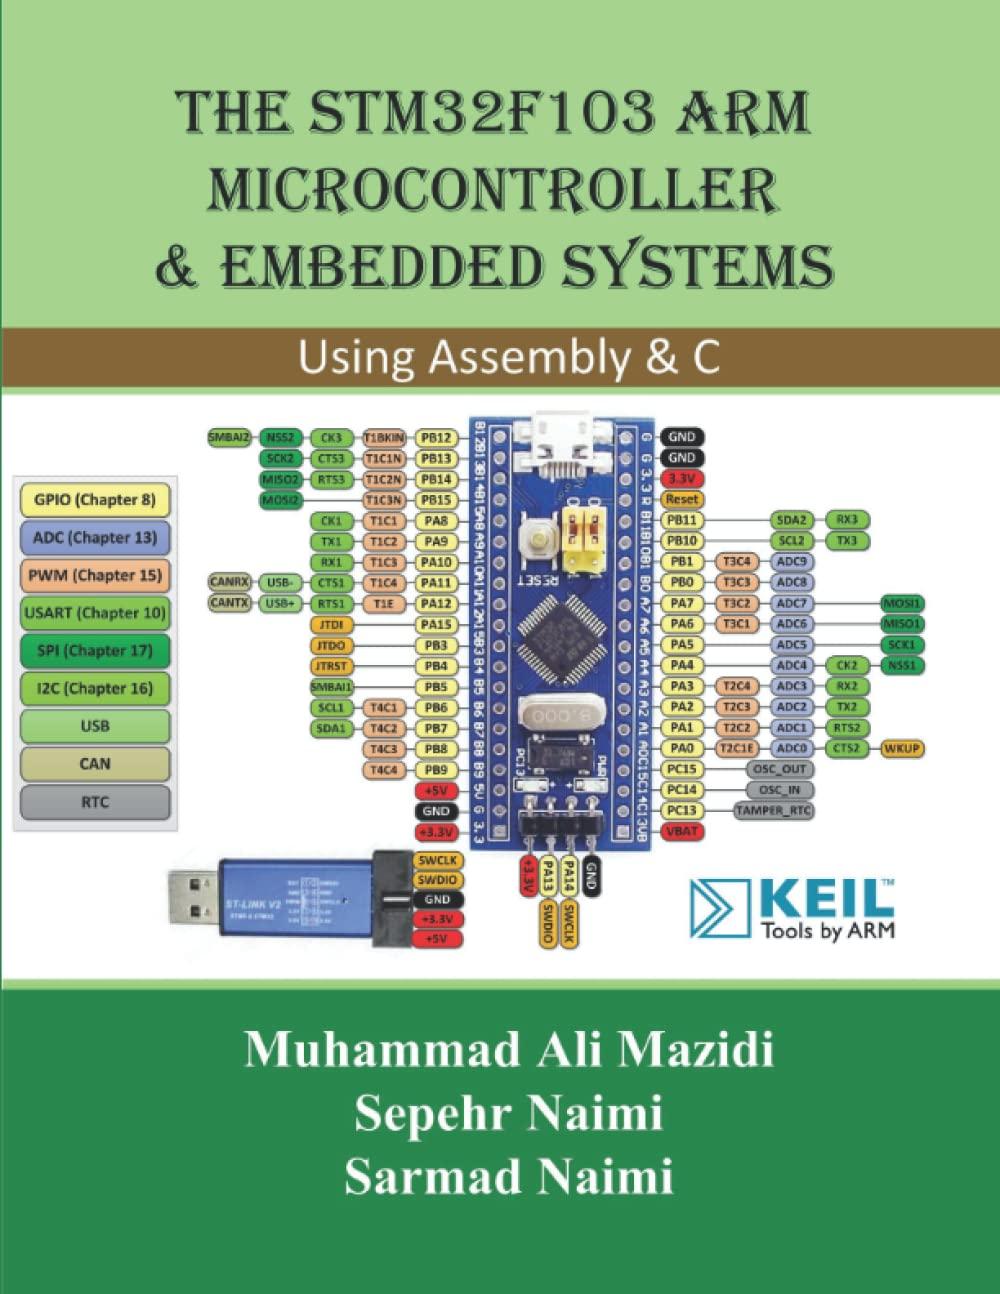 the stm32f103 arm microcontroller and embedded systems using assembly and c 1st edition sepehr naimi, sarmad